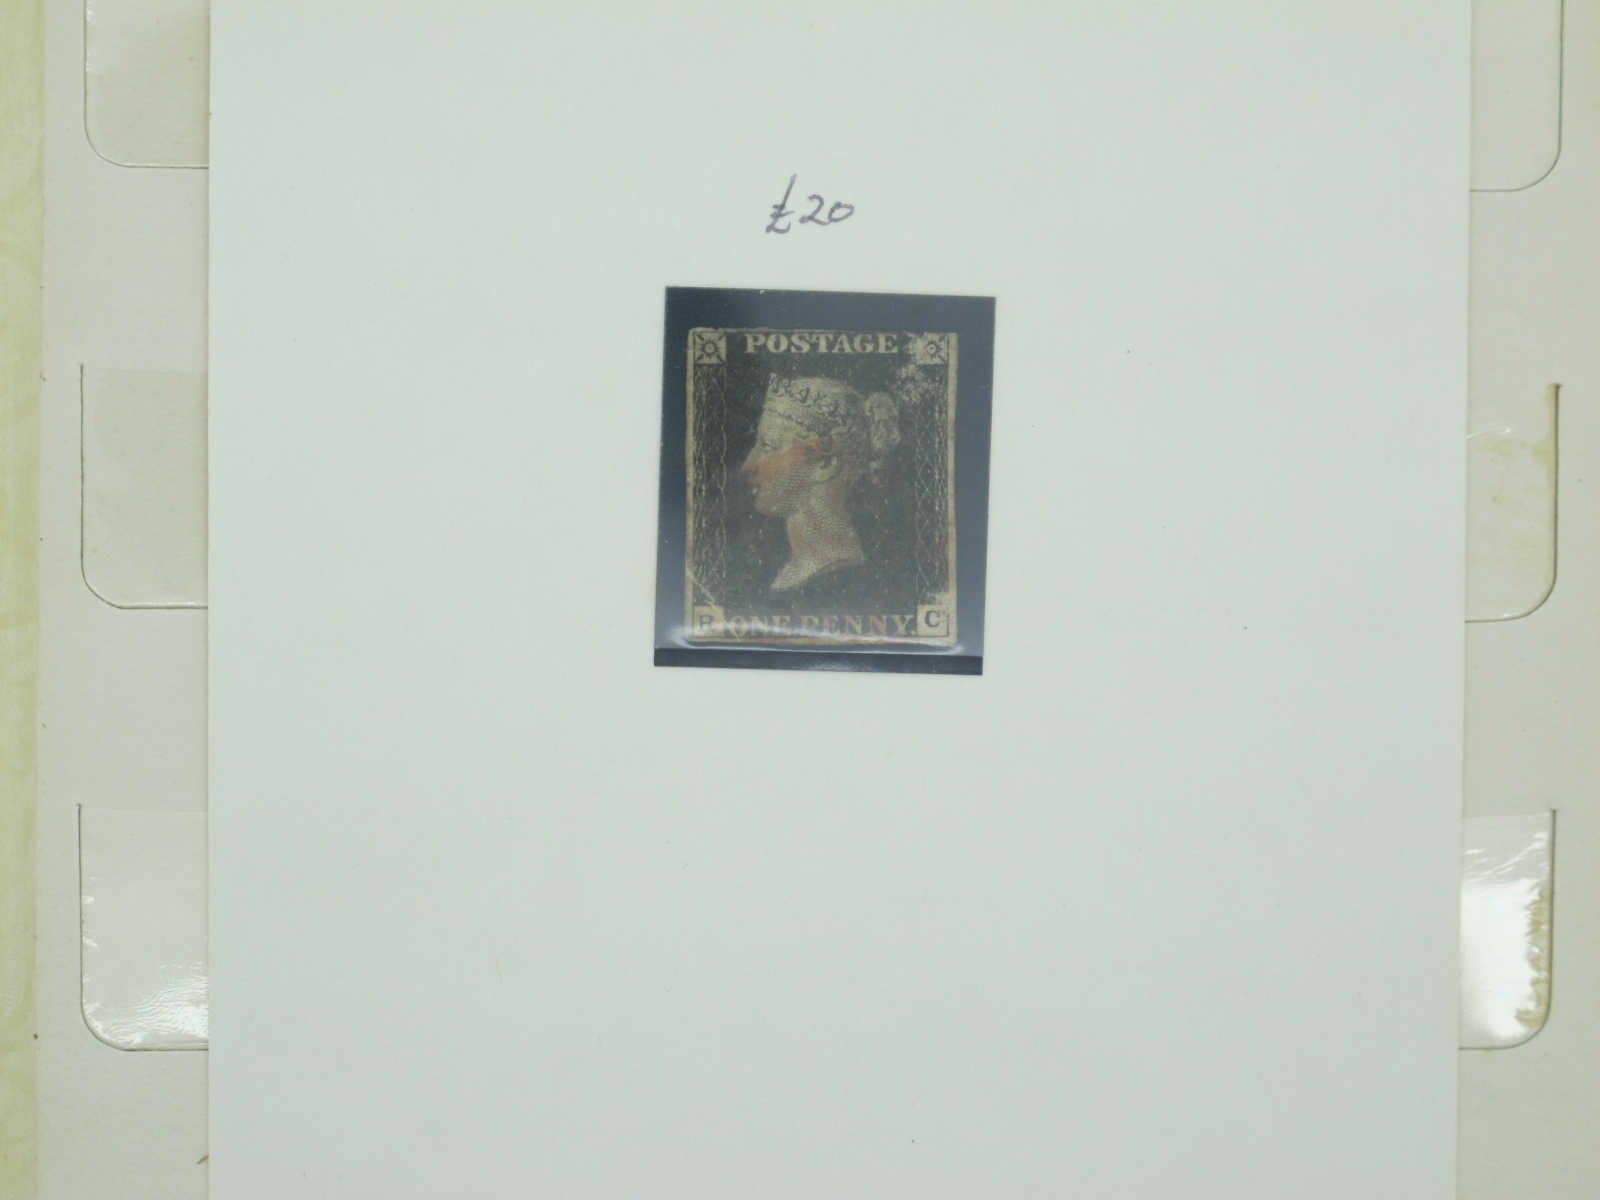 A Small Stockbook Containing a Selection of Mint GB Stamps, ranging from QV Penny Reds to QEII